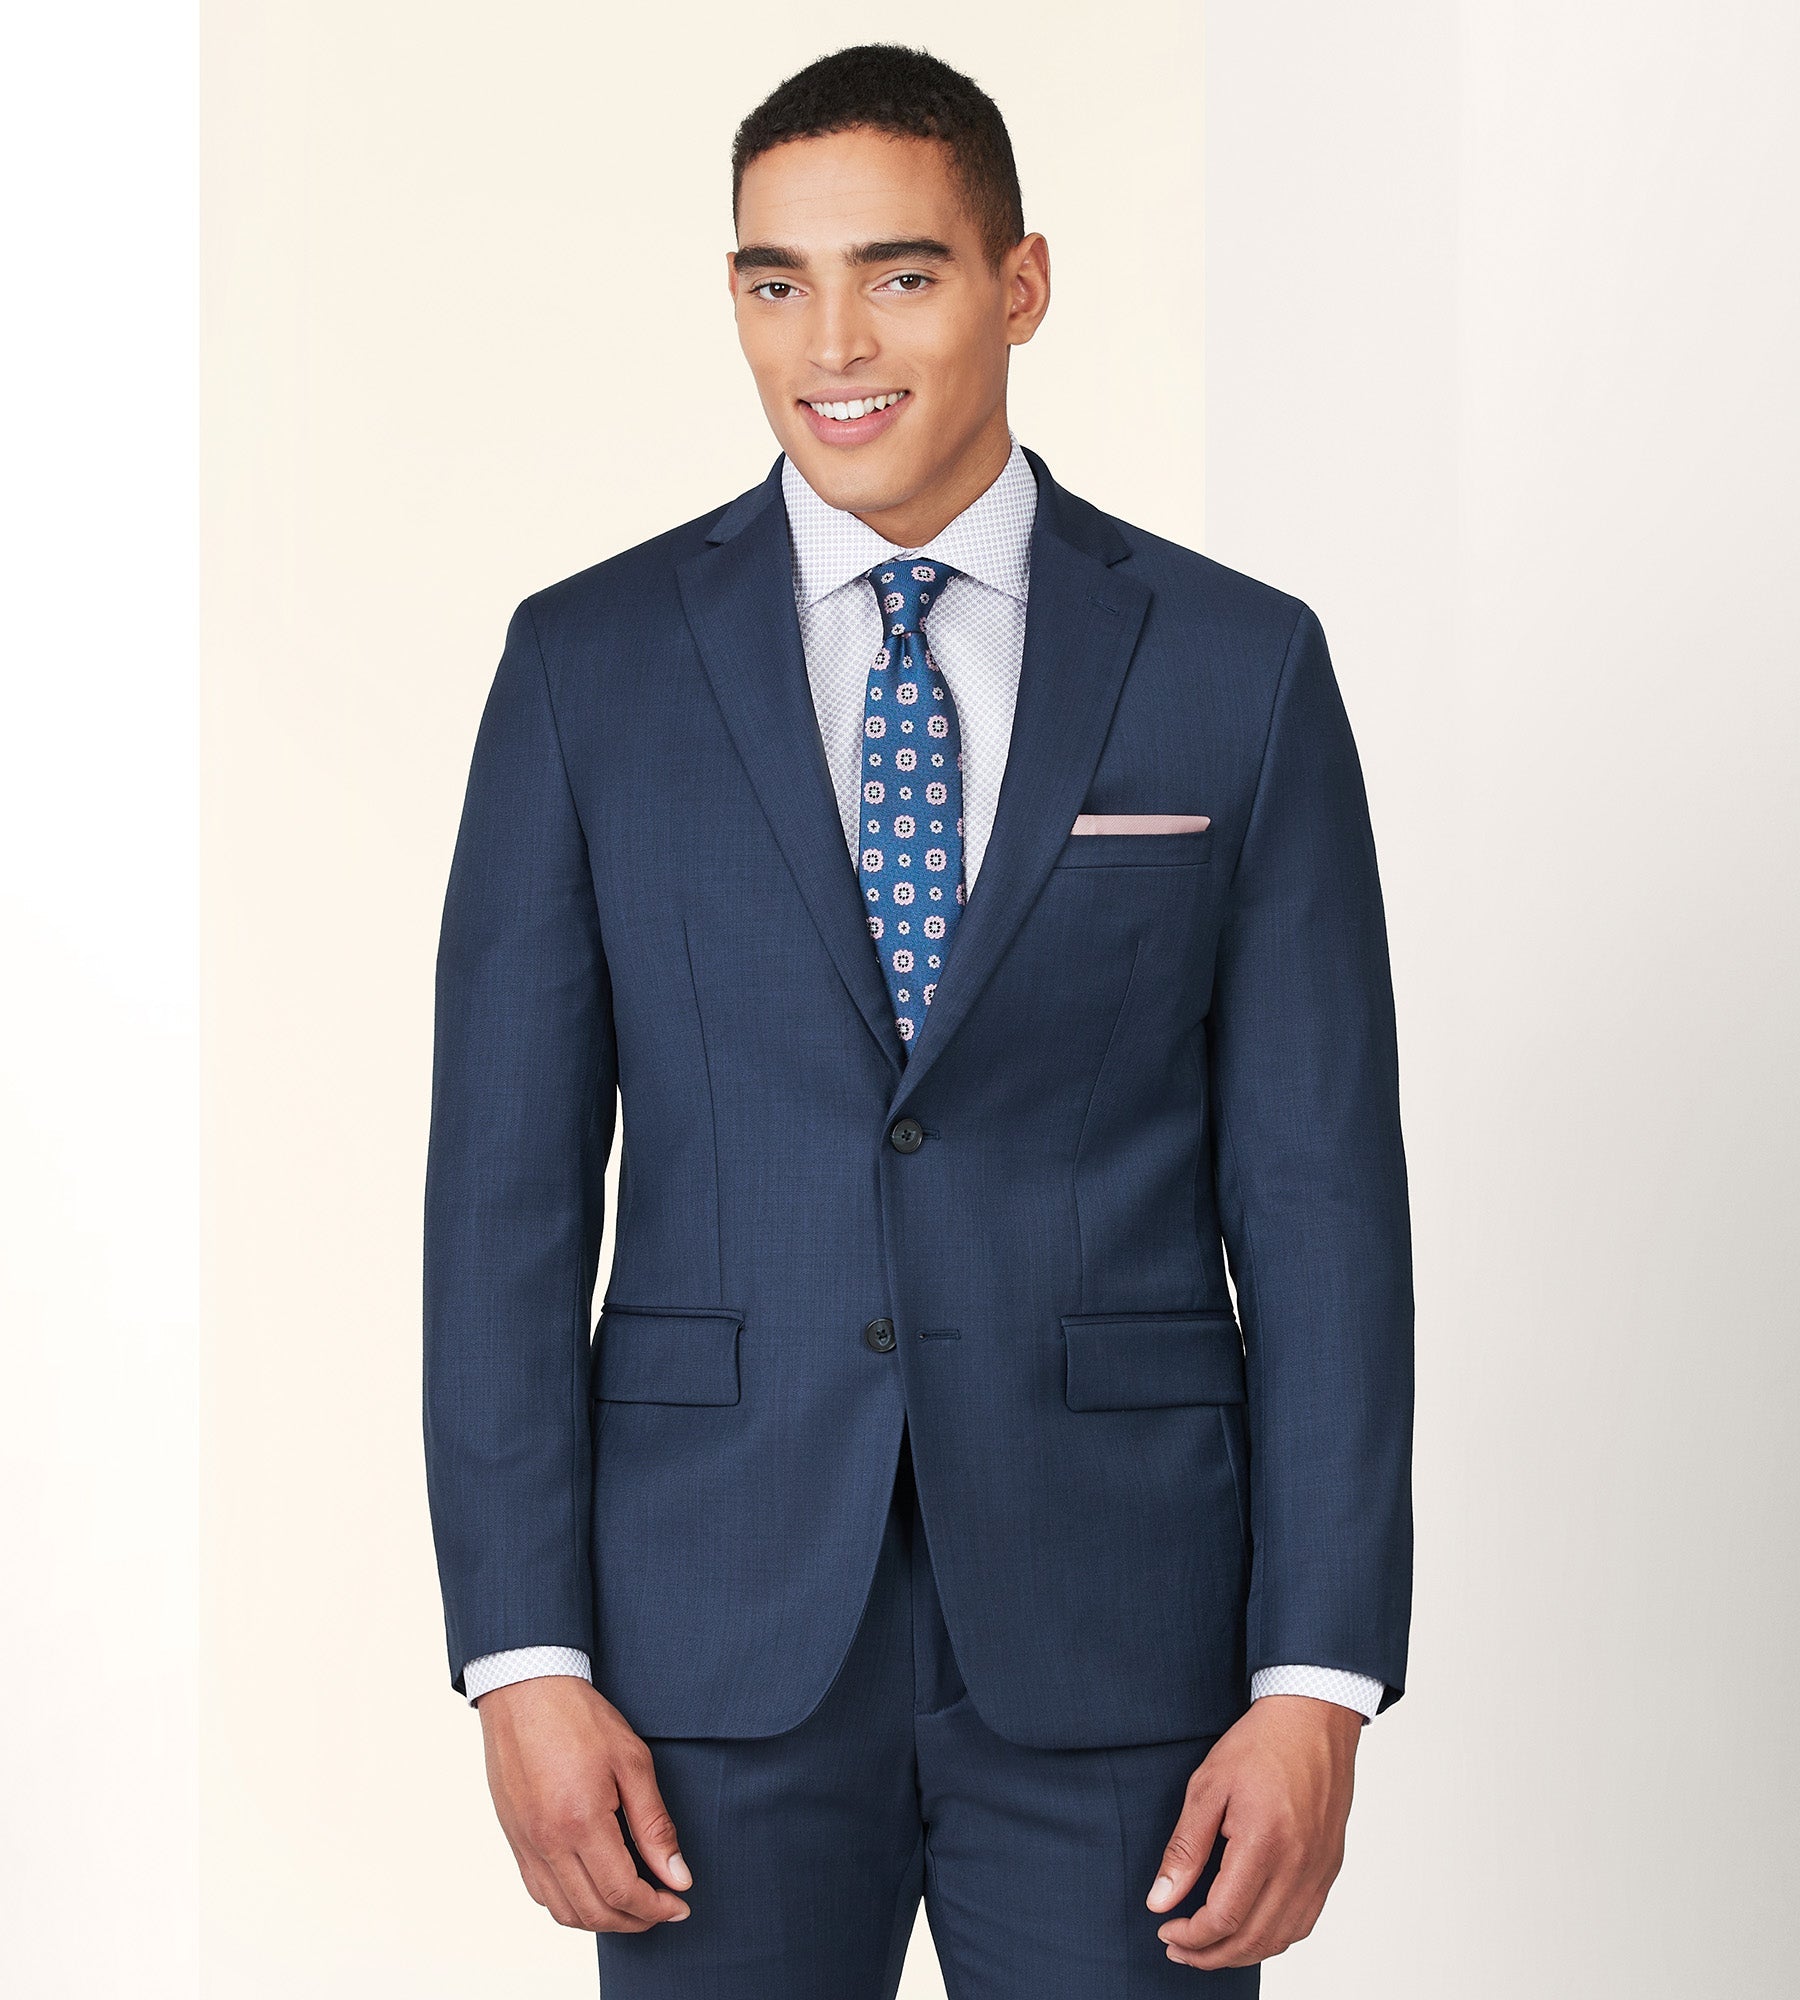 Buy Navy Blue Slim Fit Suit by  with Free Shipping